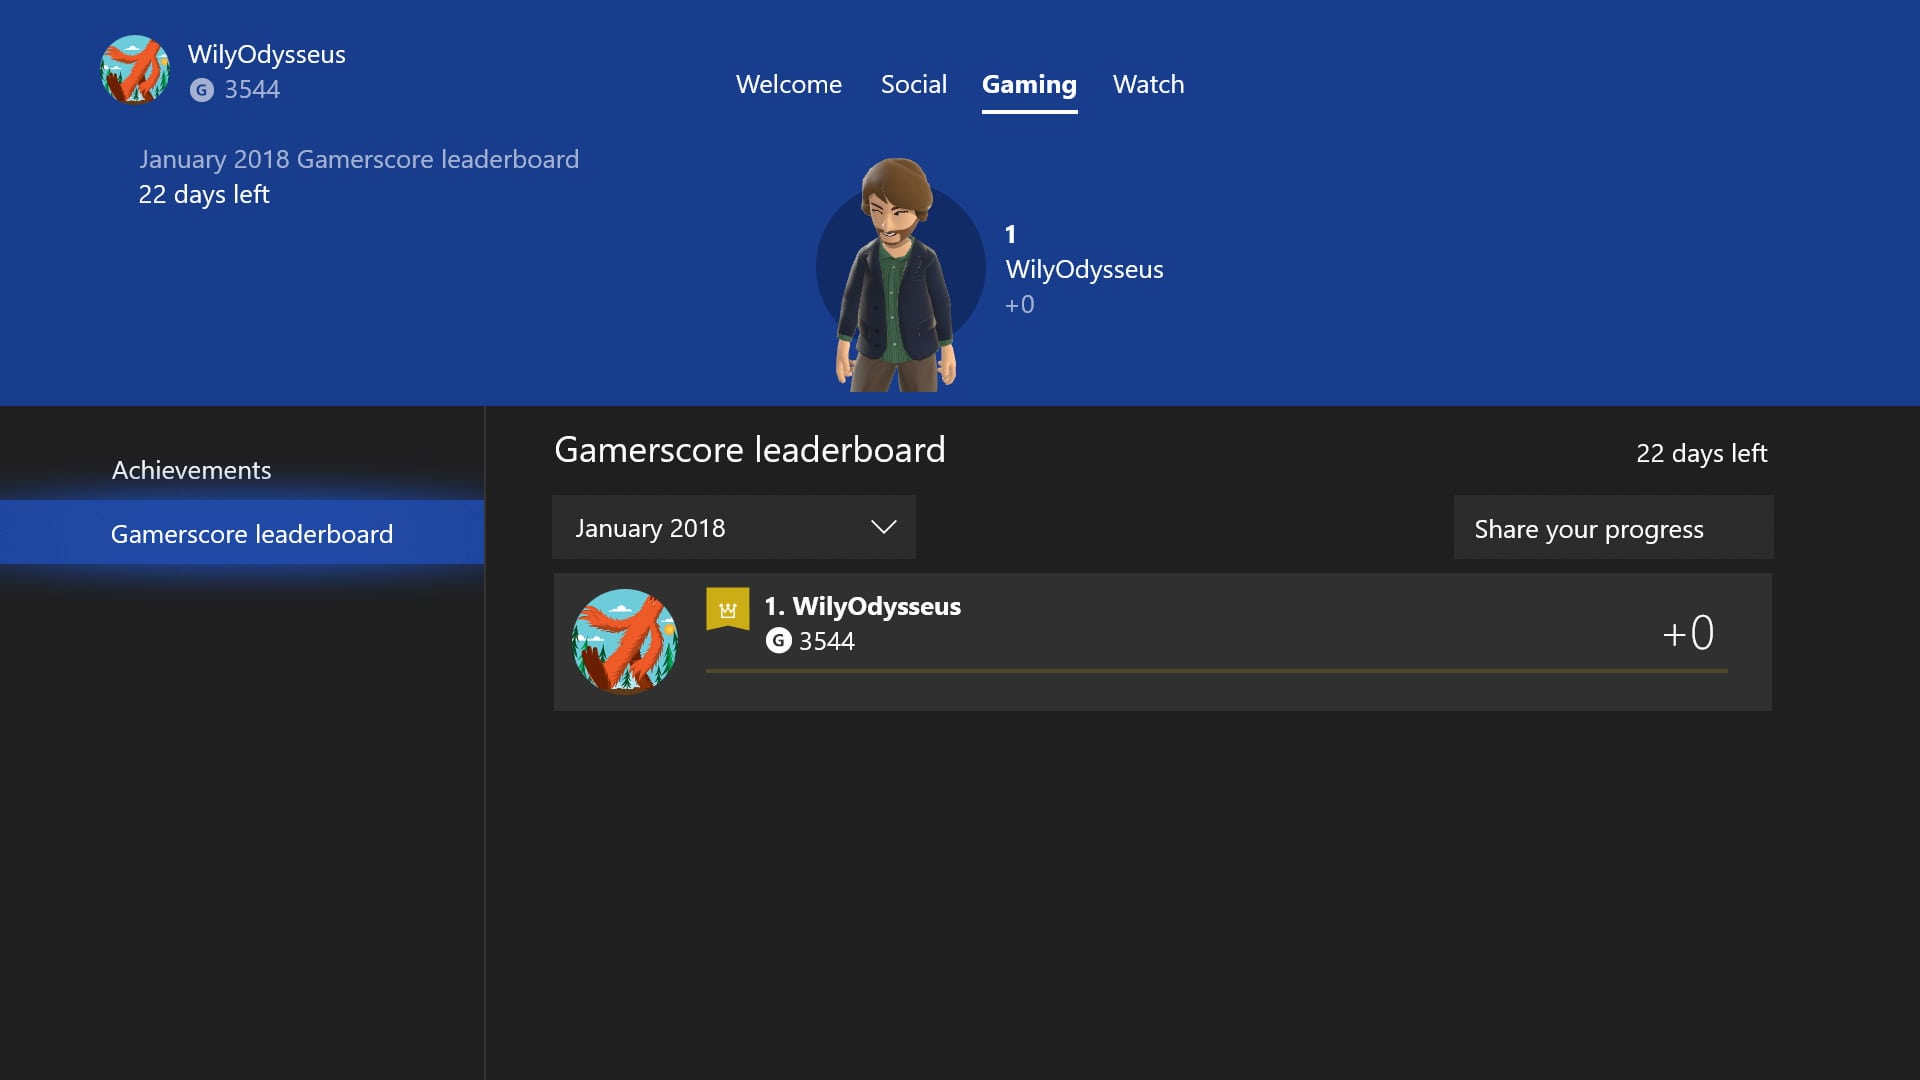 Paid Service - Xbox One Achievements and Gamerscore